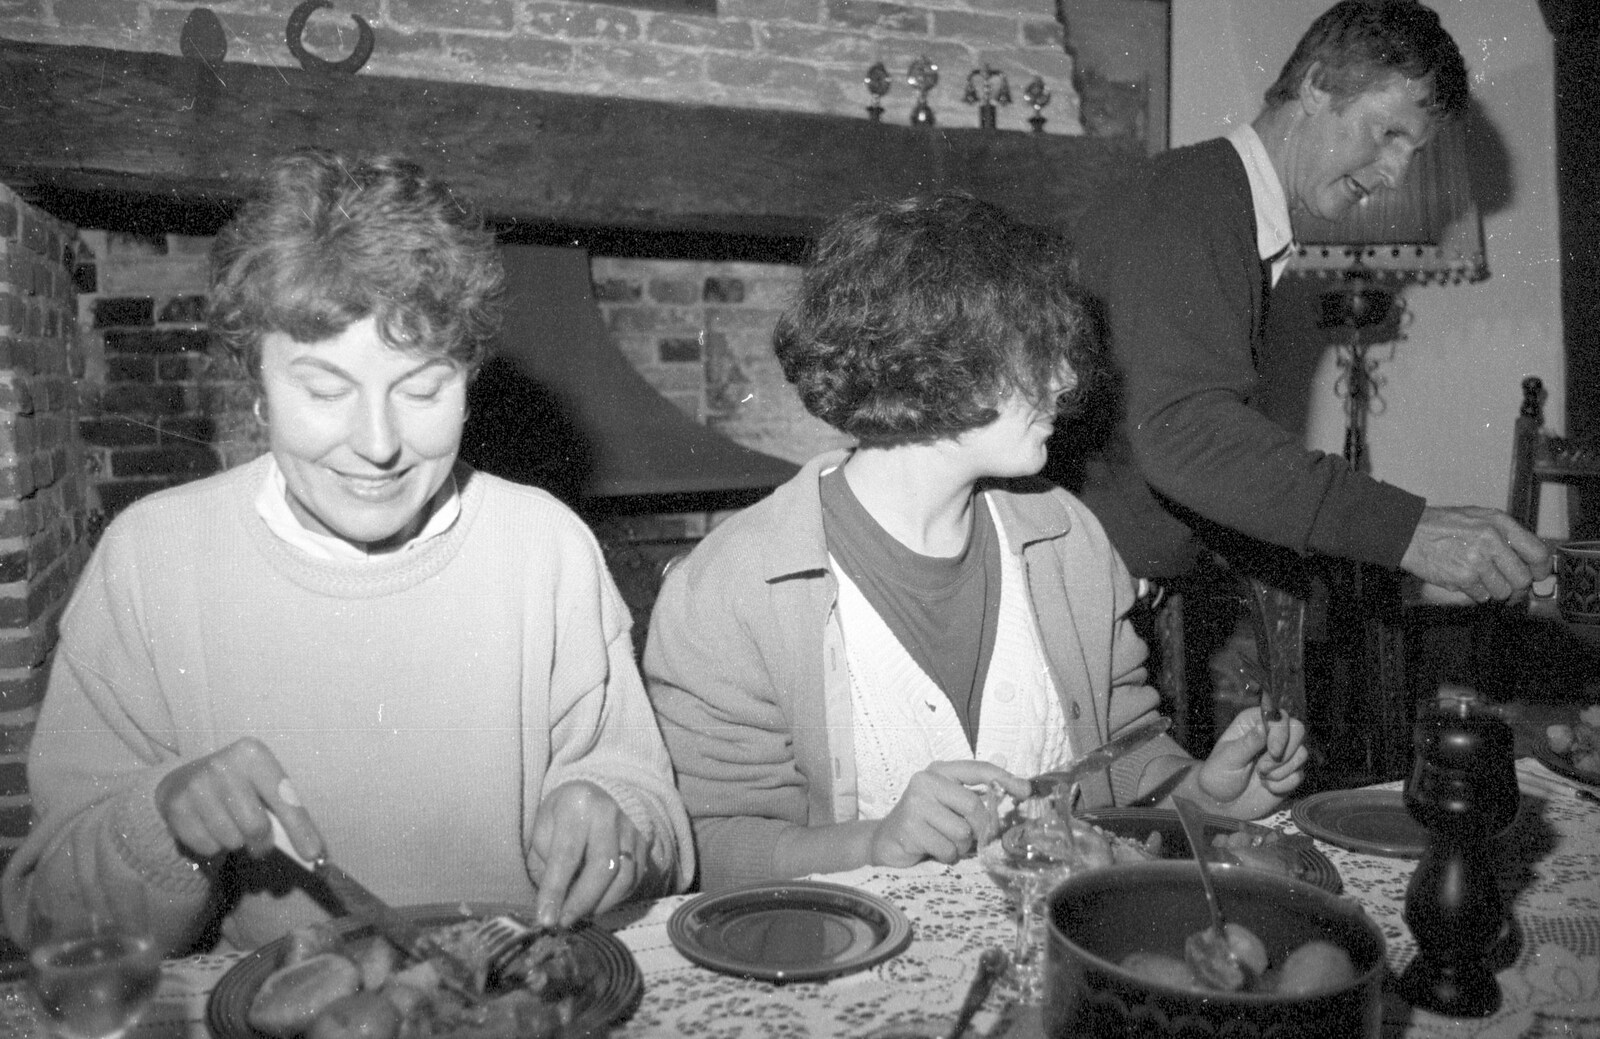 Post cider-making dinner from Cider Making in Black and White, Stuston, Suffolk - 11th October 1992